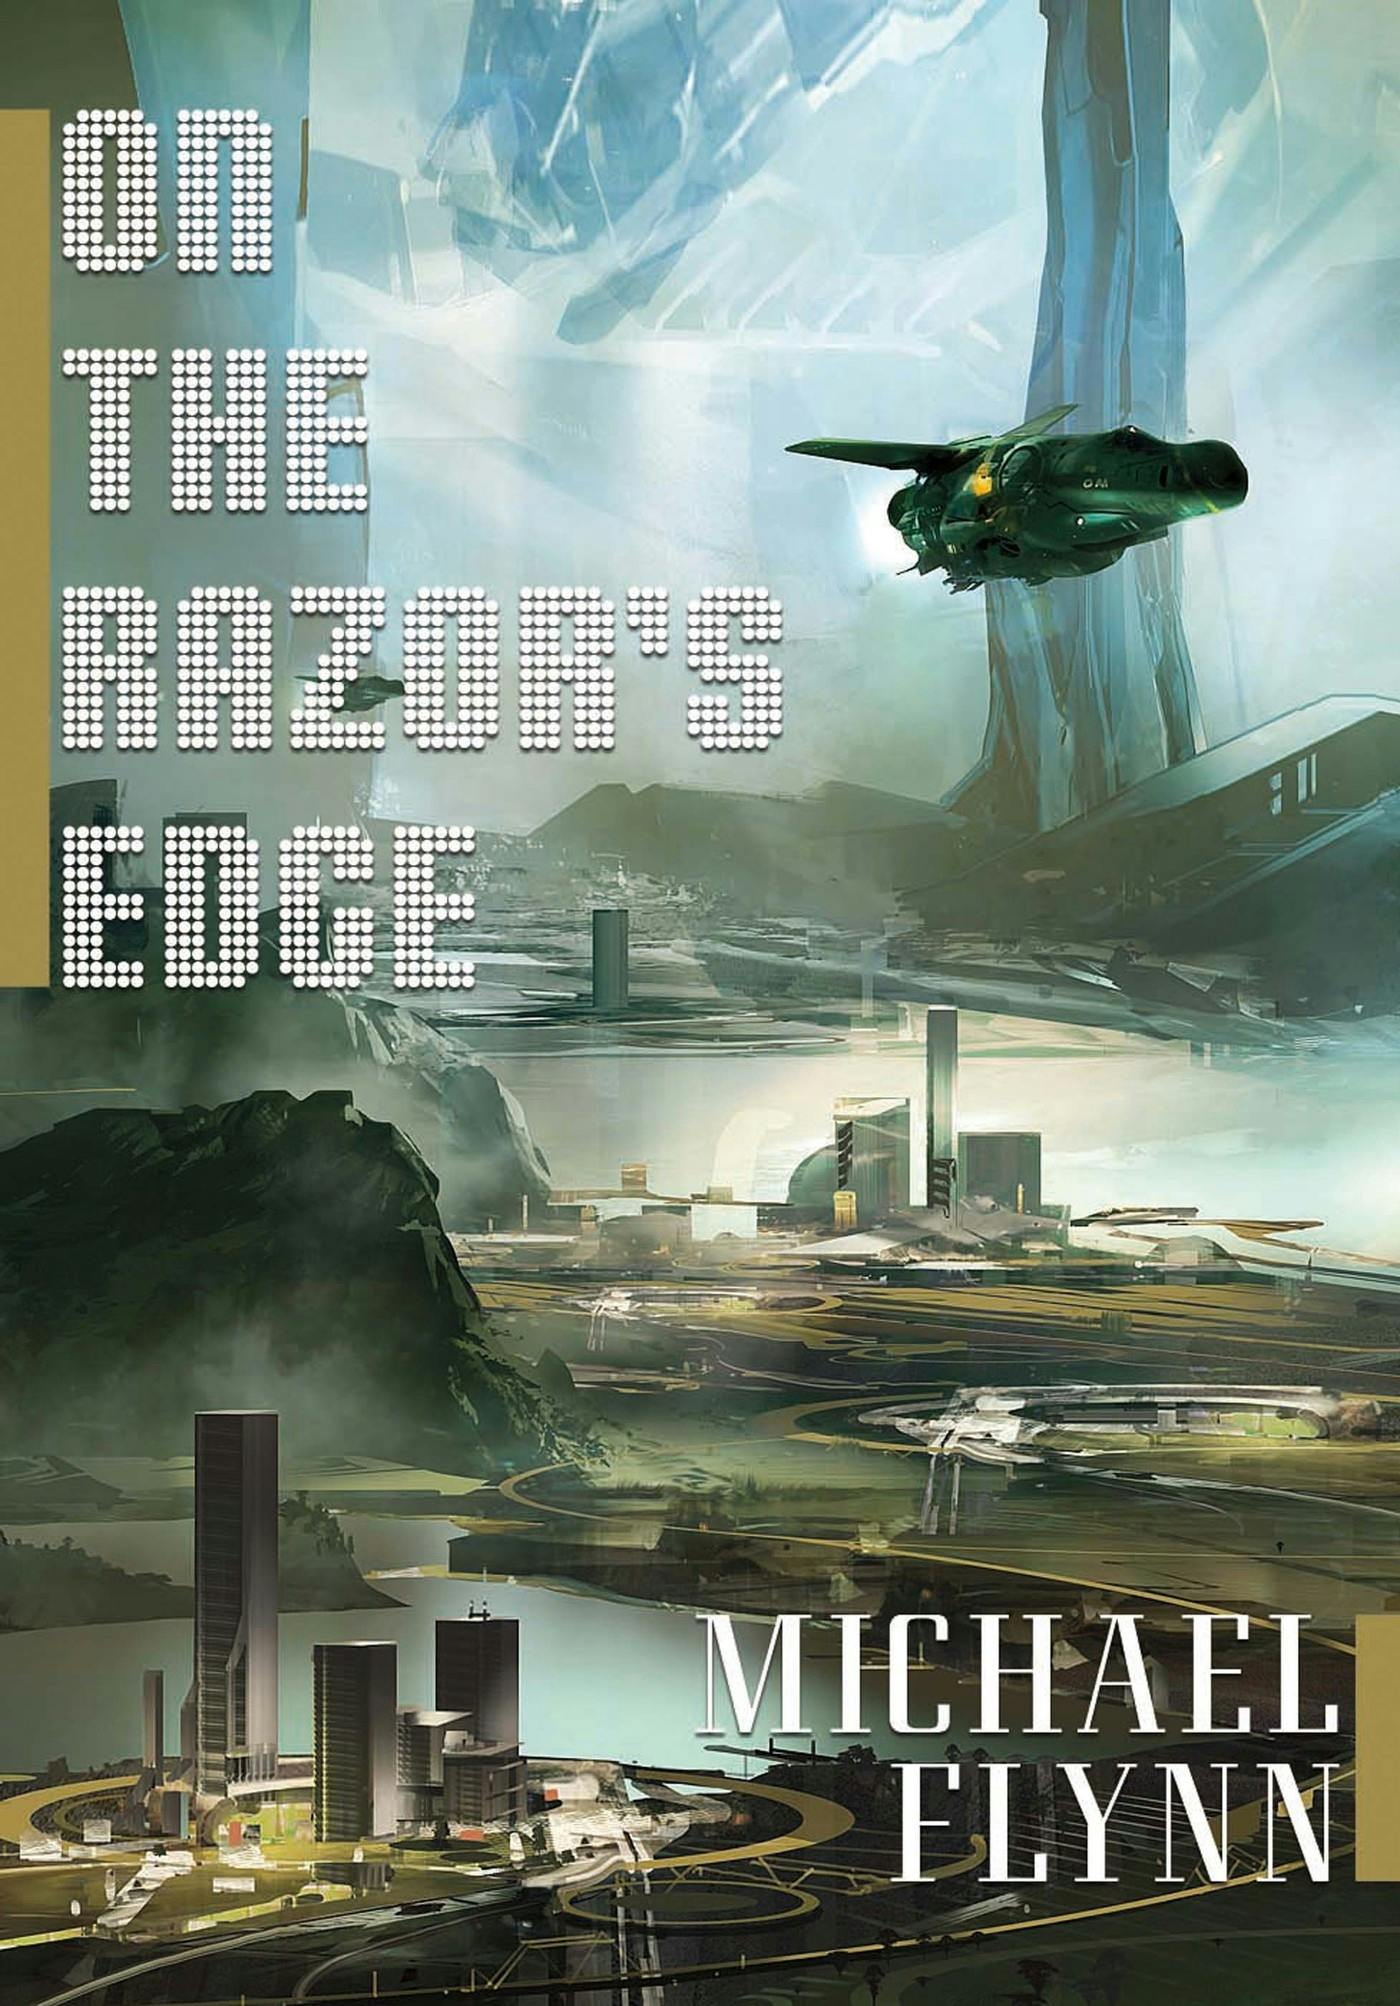 Cover for the book titled as: On the Razor's Edge